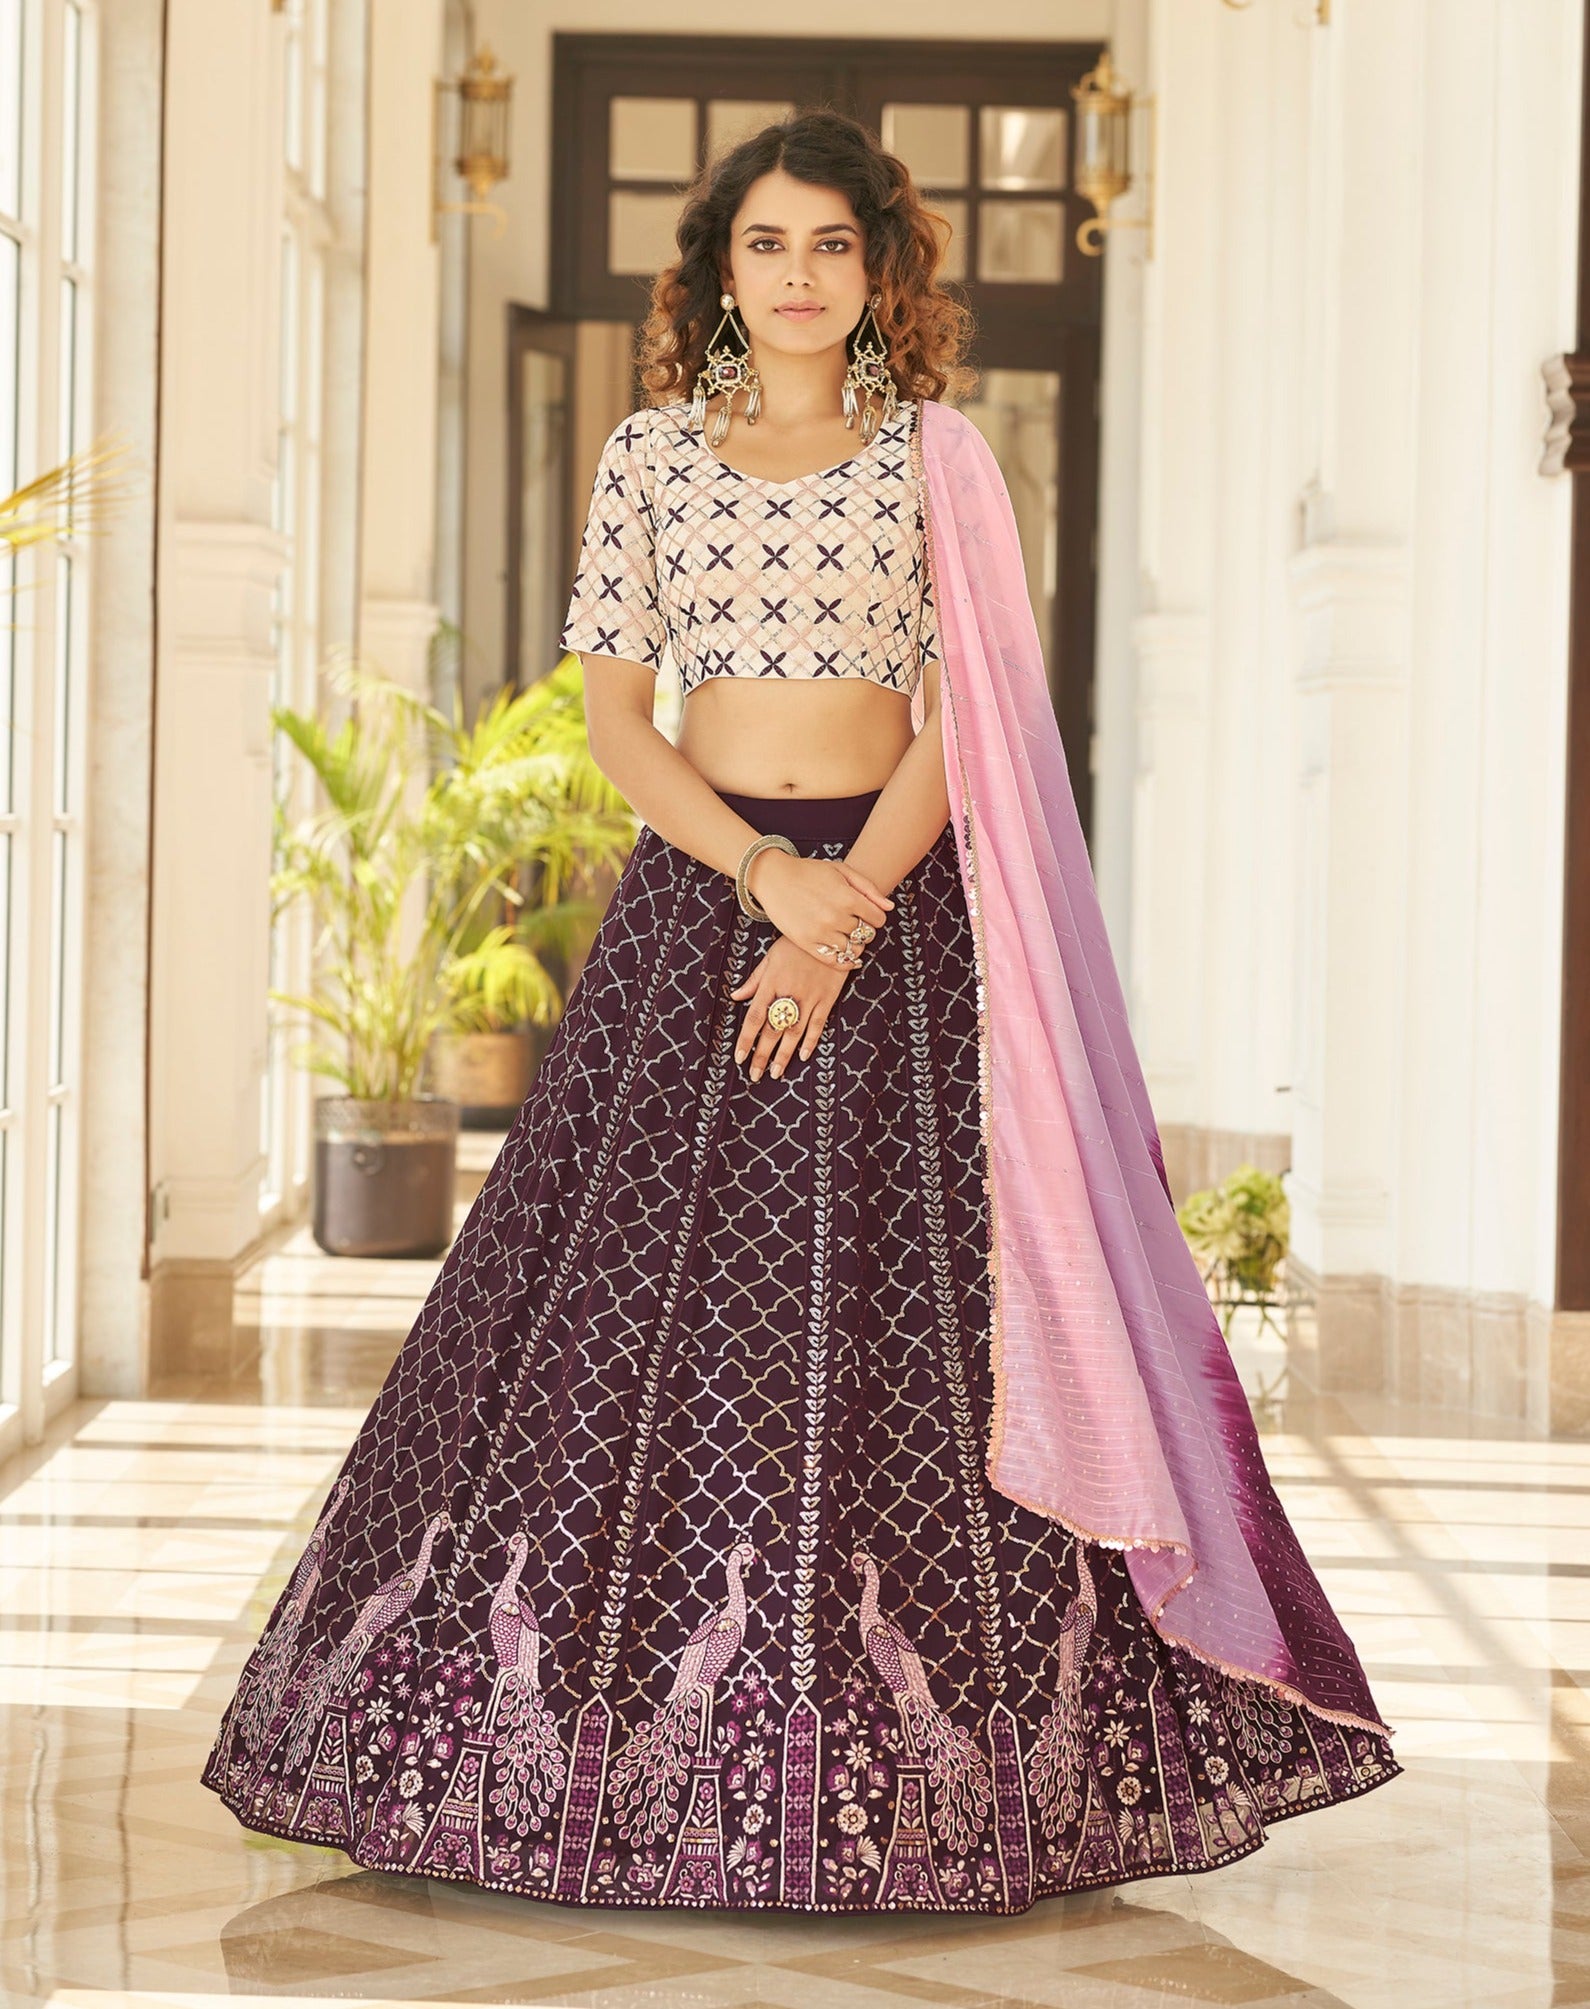 How To Rock A Bandhani Lehenga For Different Occasions - KALKI Fashion Blog